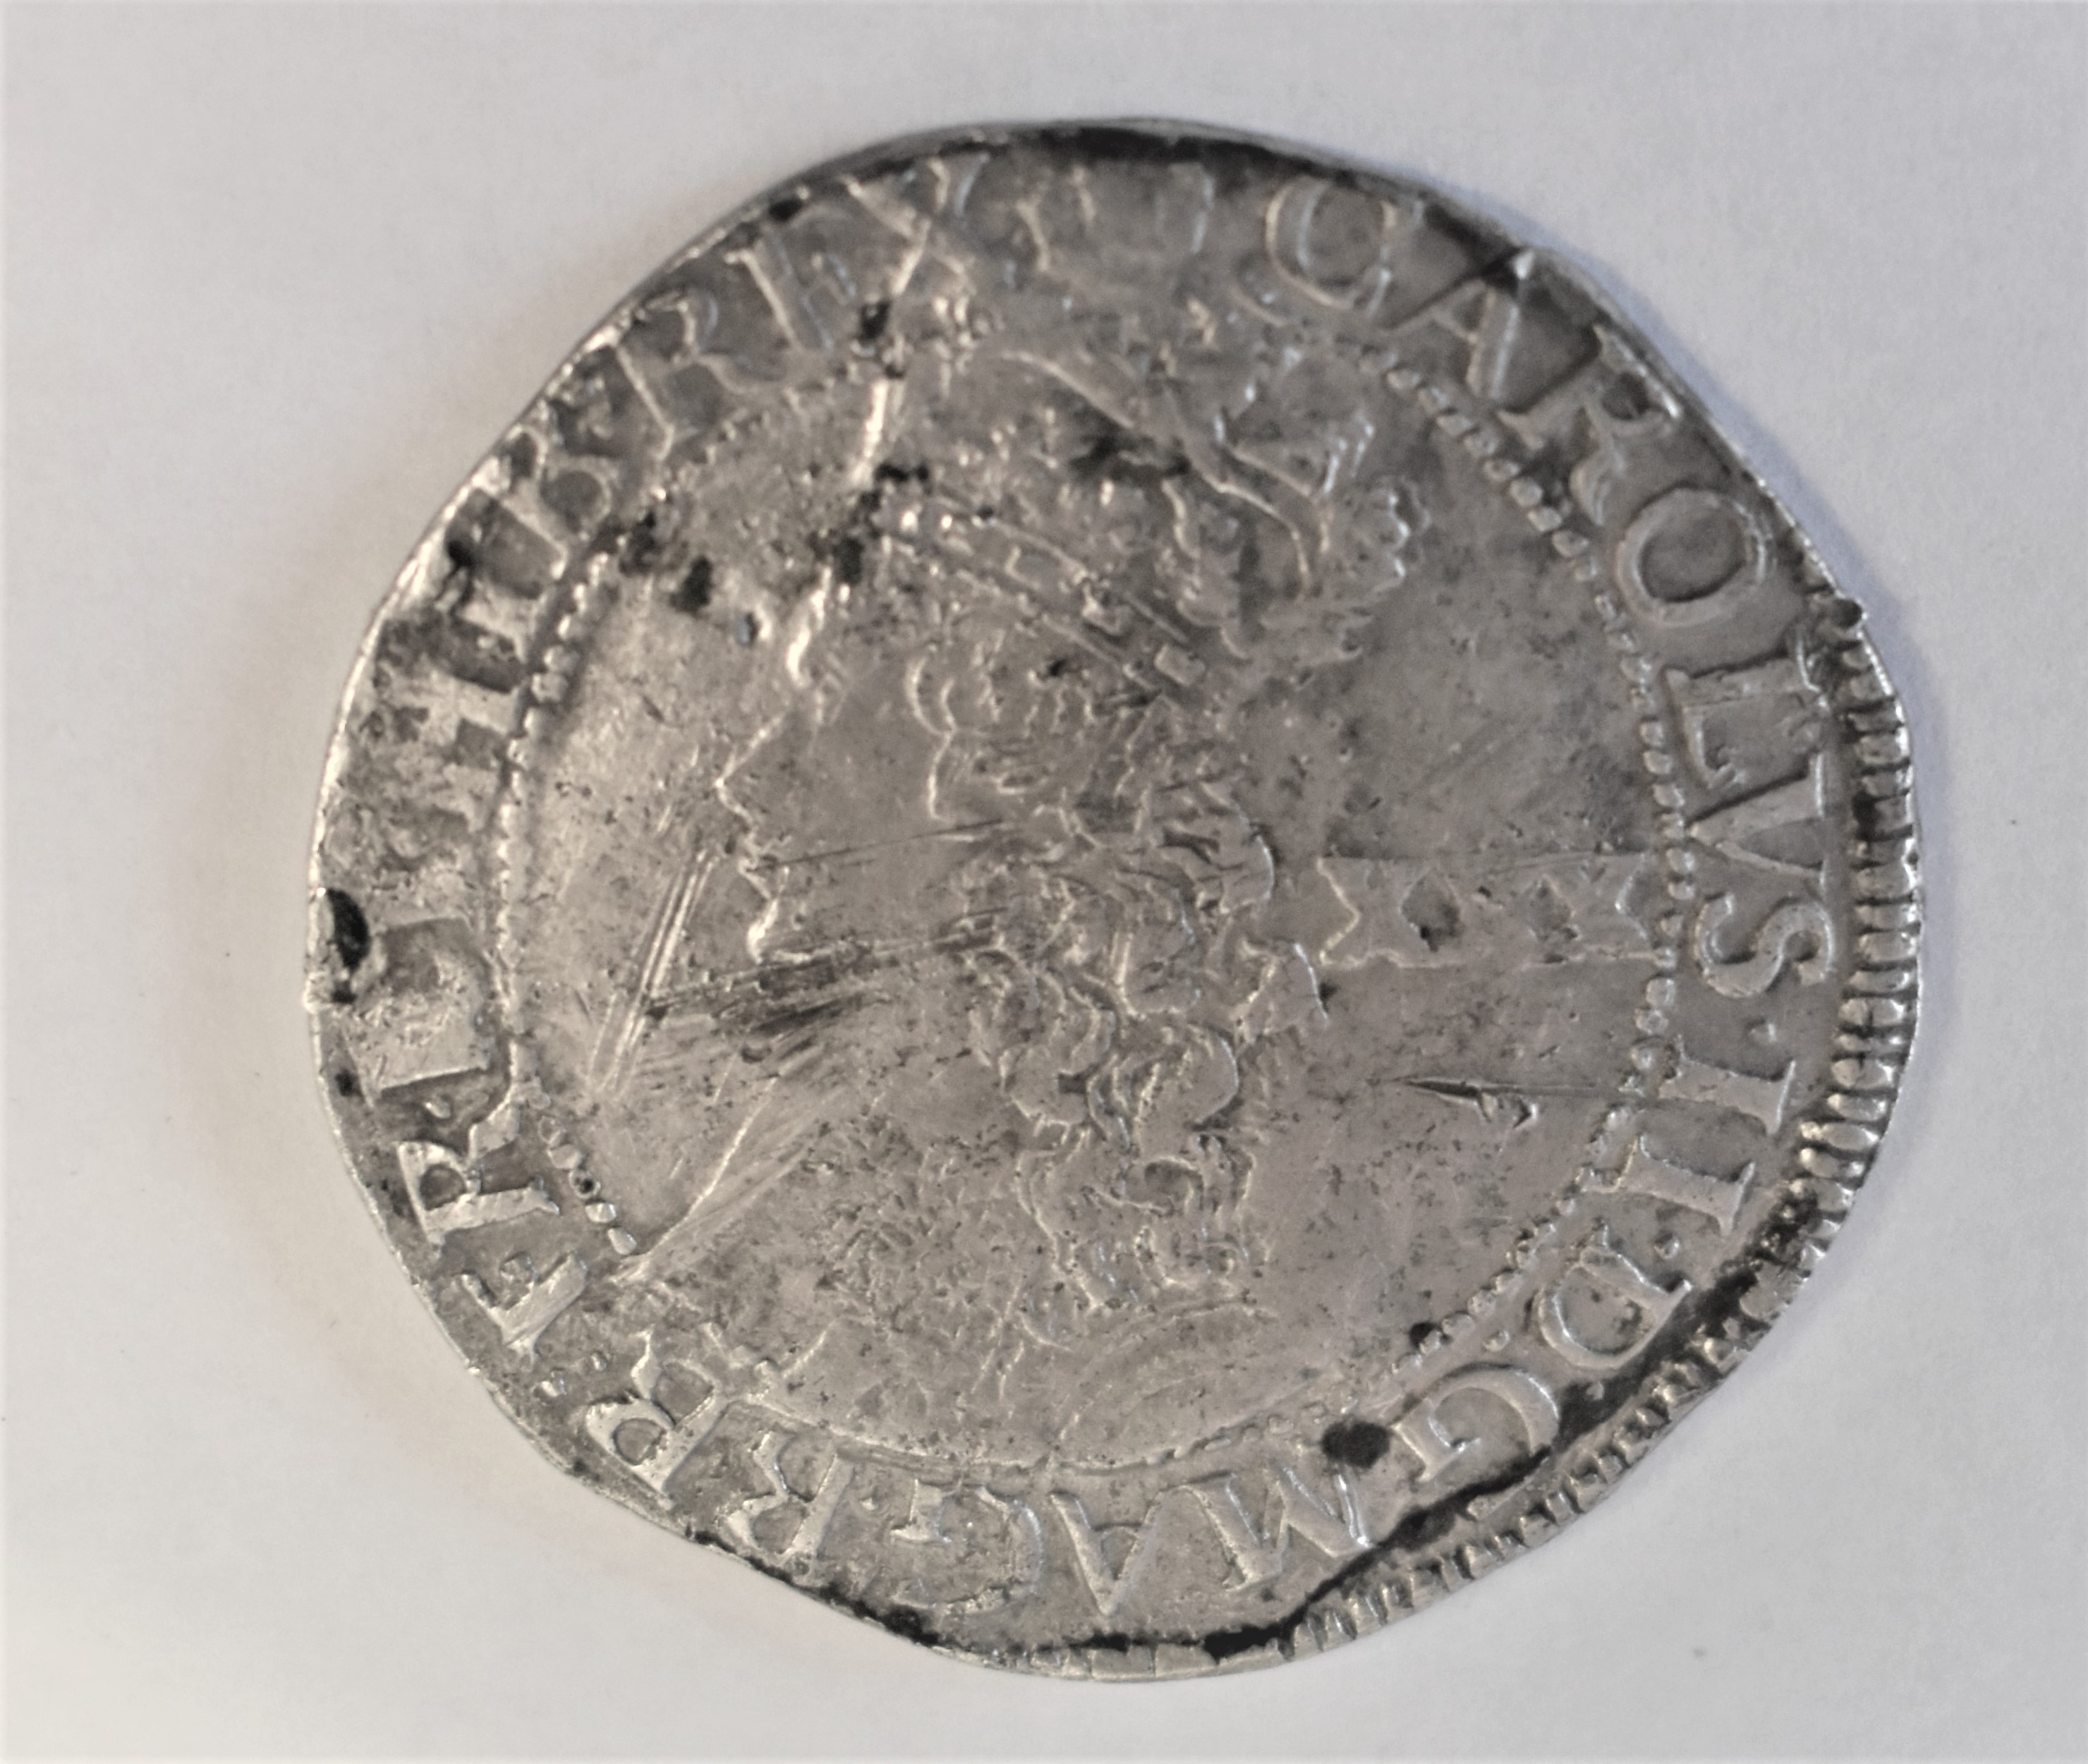 1660-1662 Charles II Hammered Halfcrown, third issue, XXX by bust, inner circles, mm Crown. S